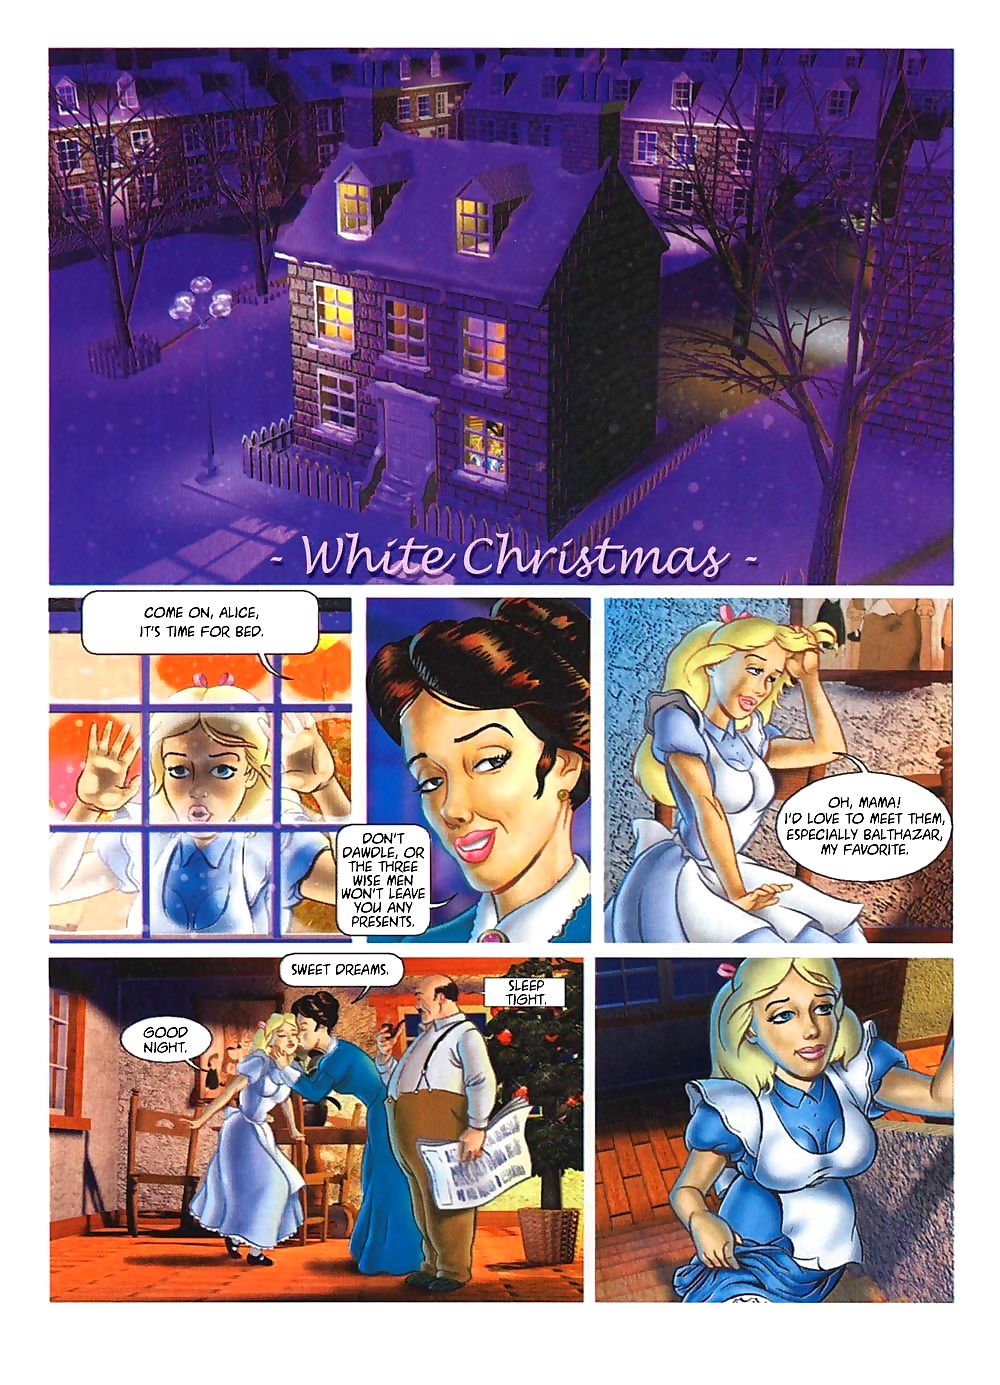 wit Kerst page 1